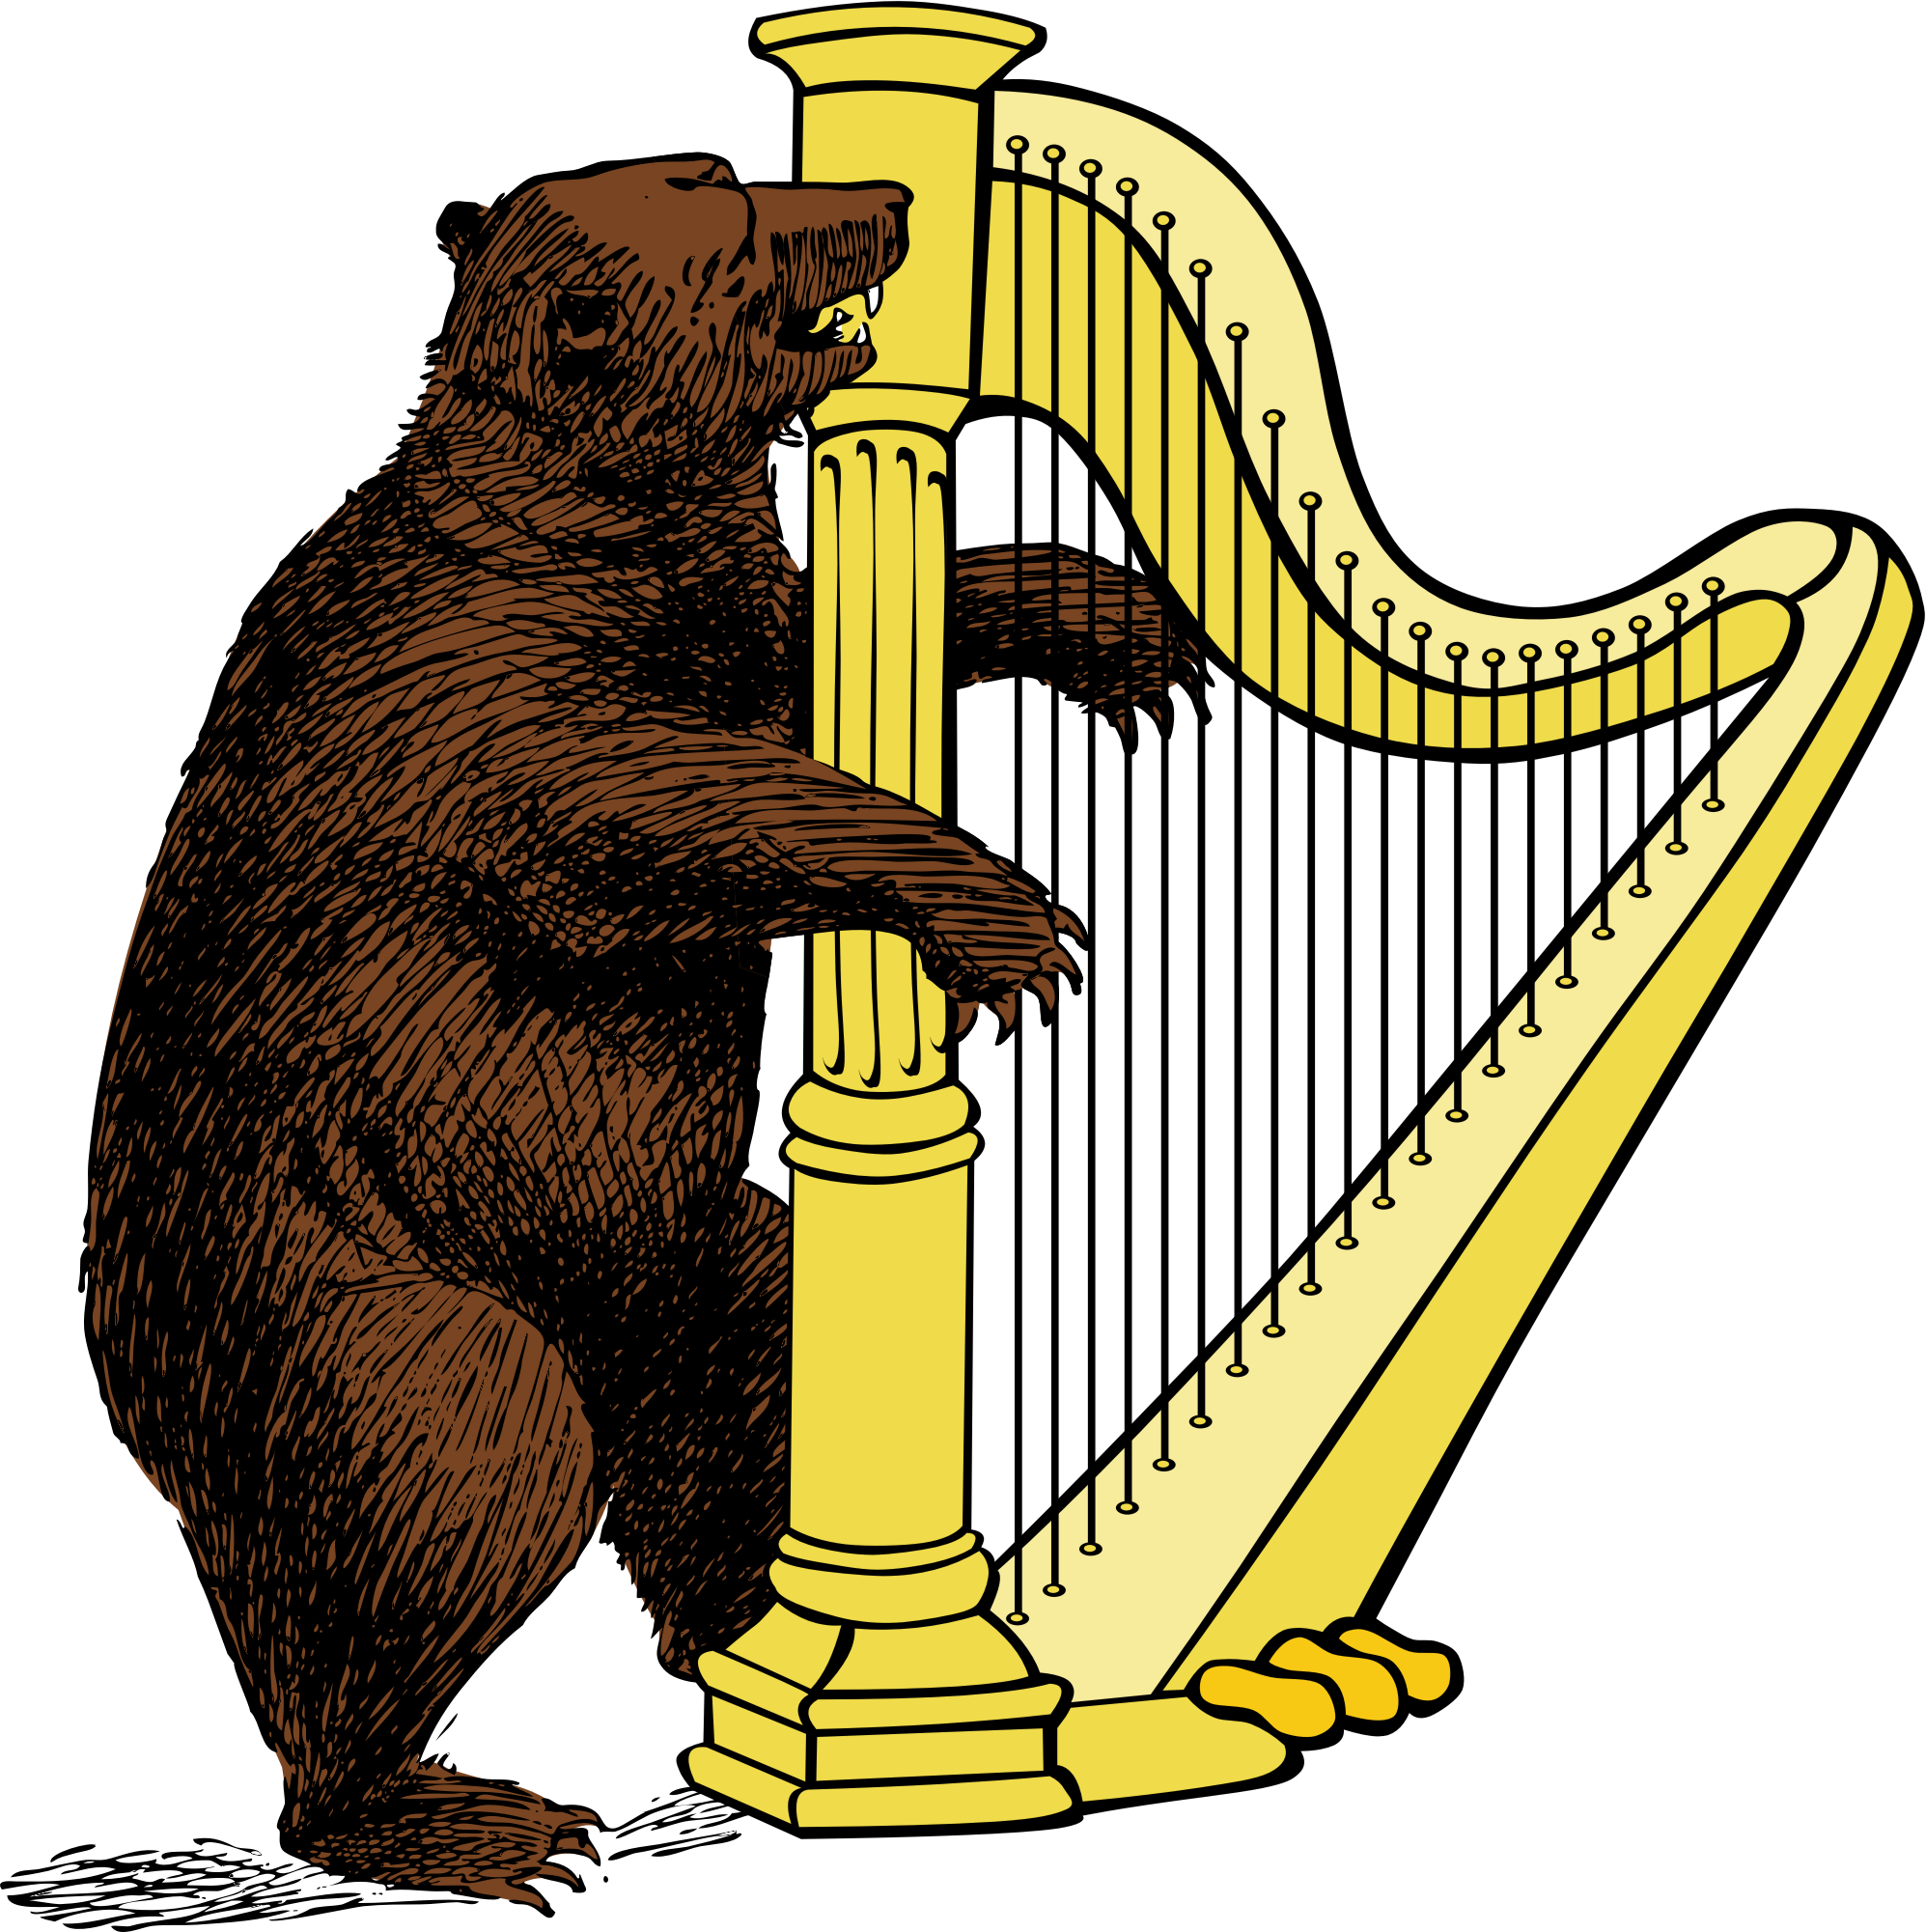 Bear And Harp By @lazur Urh, Bear Playing On A Harp - Harp Black And White (1995x2001)